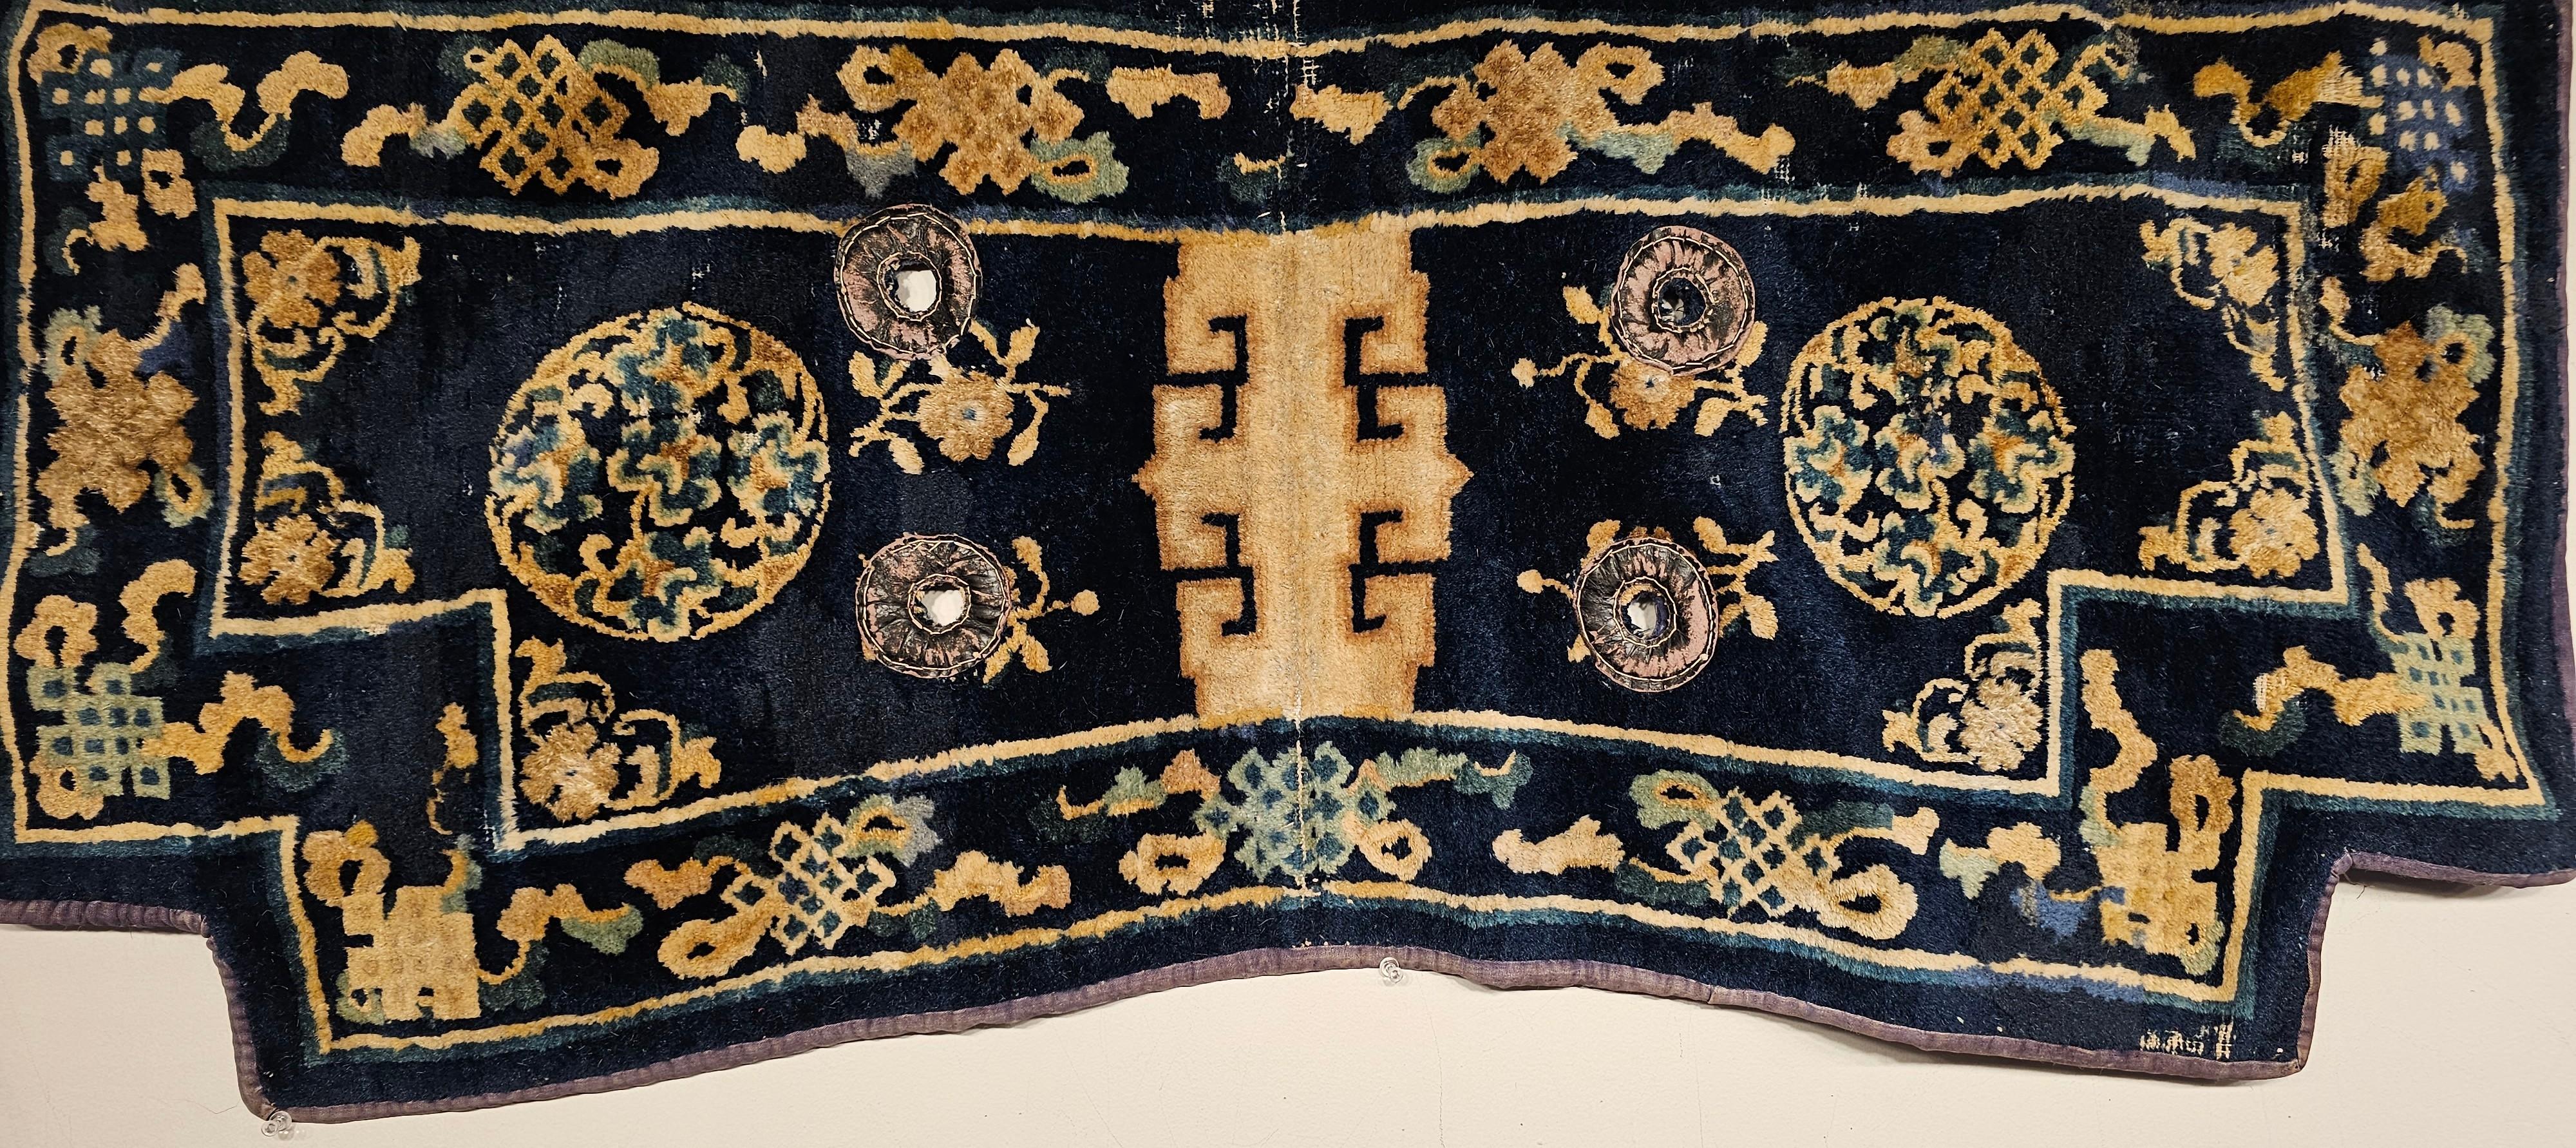 A beautiful Ningxia saddle cover from the western China circa the 3rd quarter of the 19th century.  The antique saddle cover is in wonderful condition for an item being over one hundred years of age and used.  The design in the indio blue  field